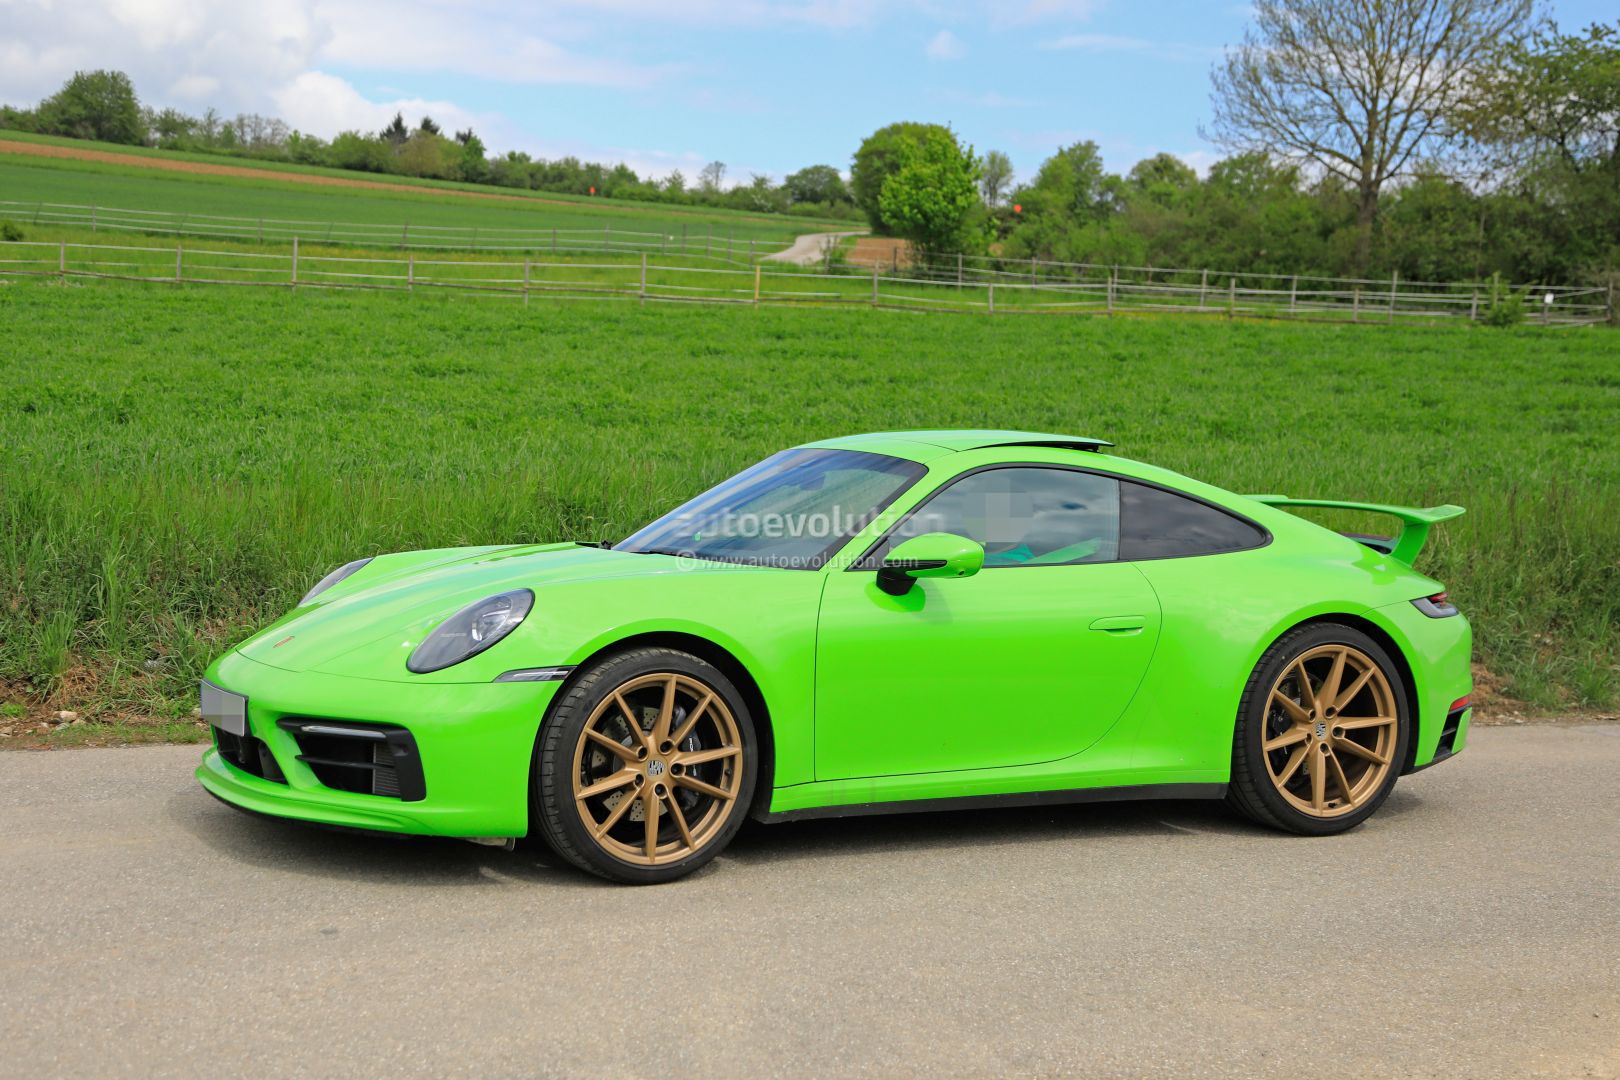 2020 Porsche 911 Carrera (Base Model) Spotted with Carrera Aerokit, Stands  Out - autoevolution